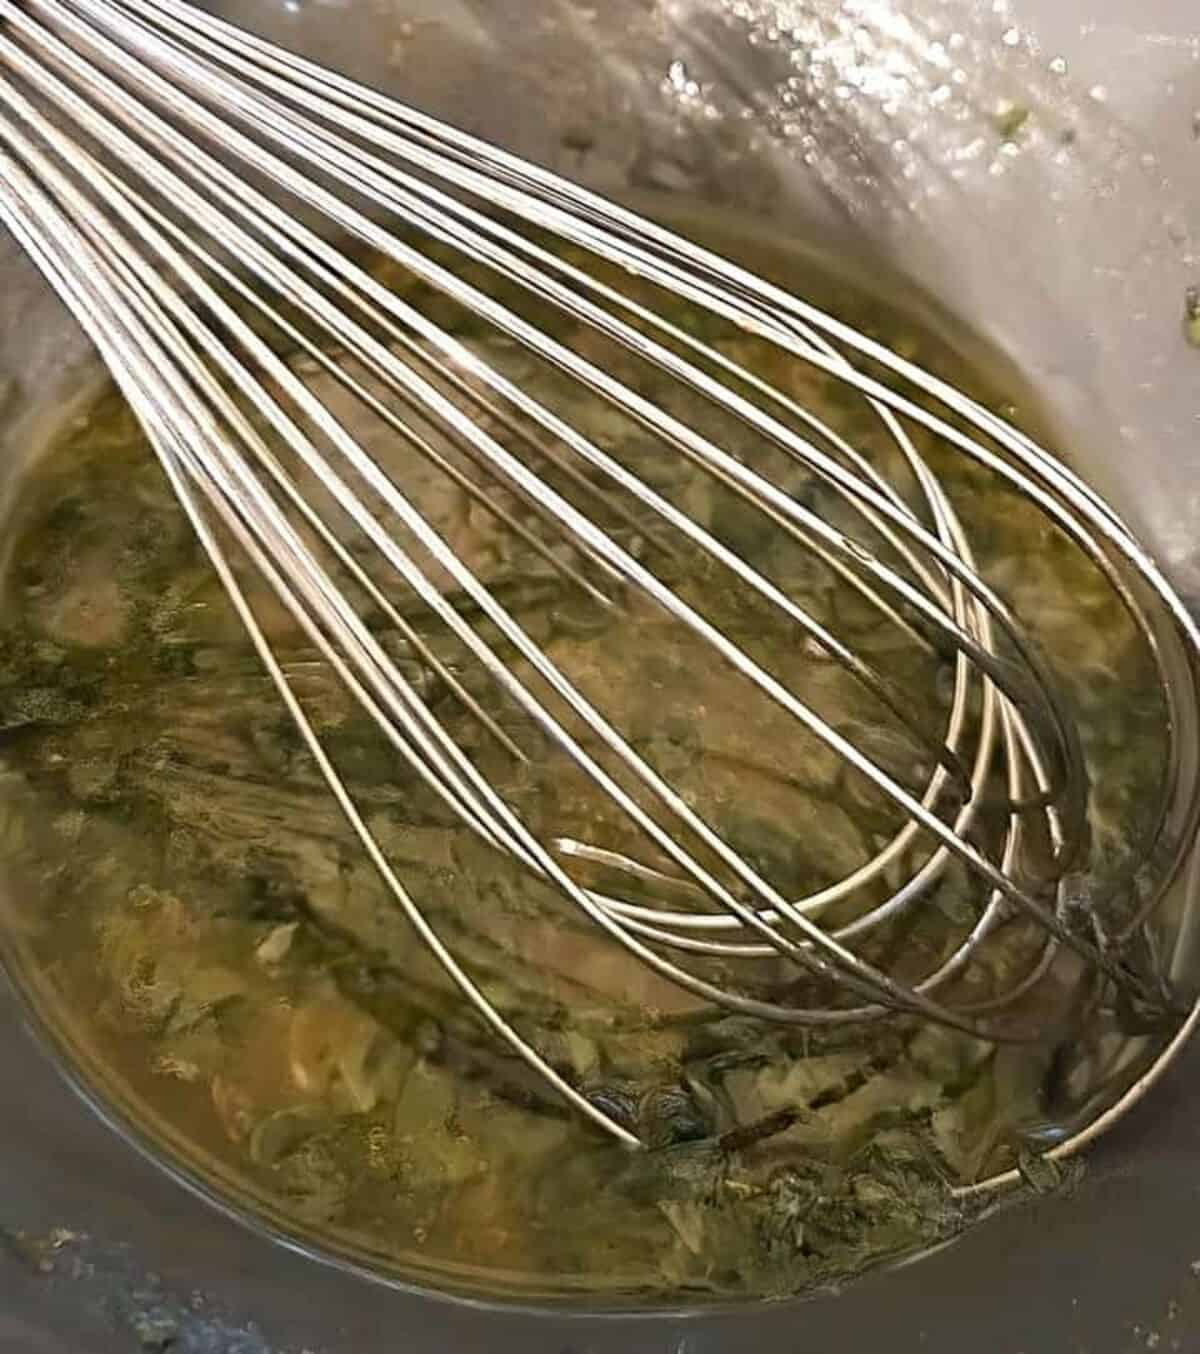 marinade in a bowl being stirred together with a whisk.